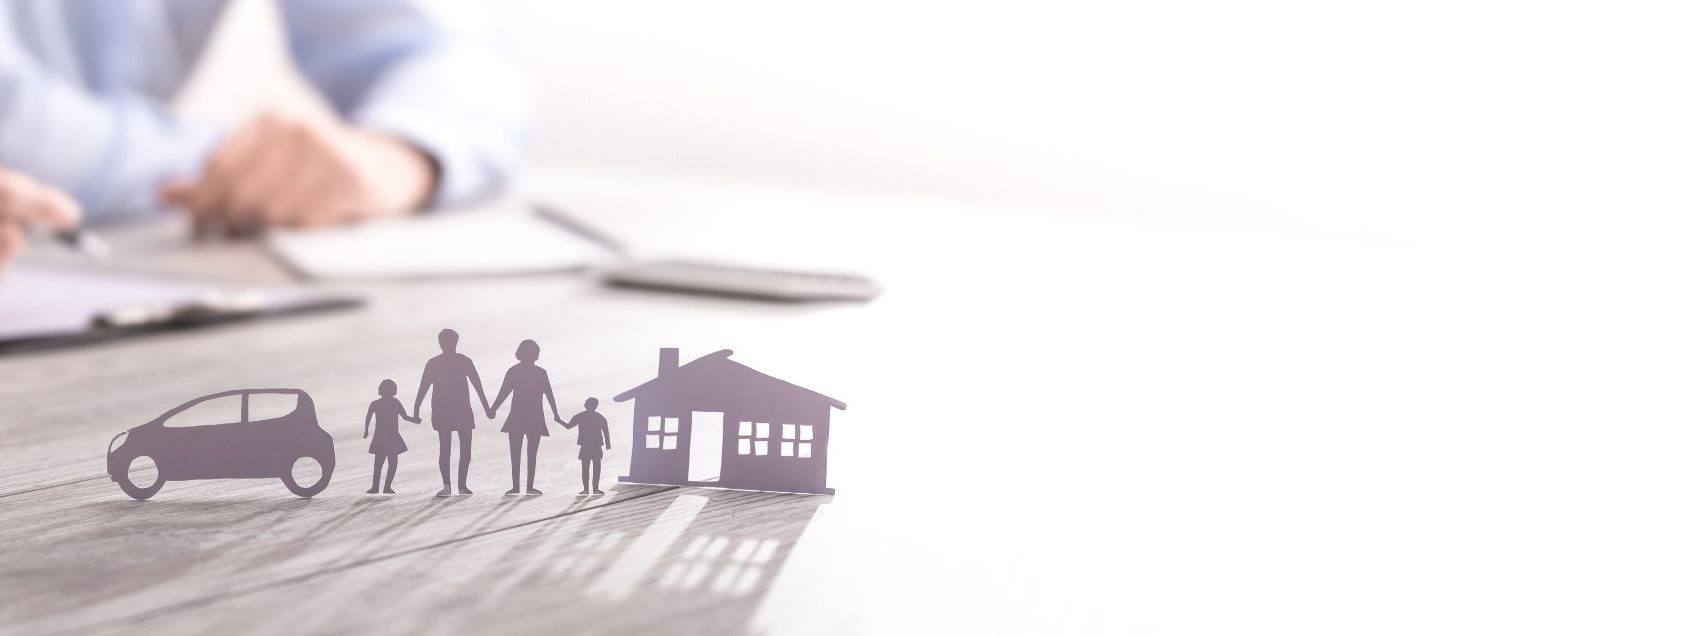 paper cut out of family and a house with a person signing a contract in the background